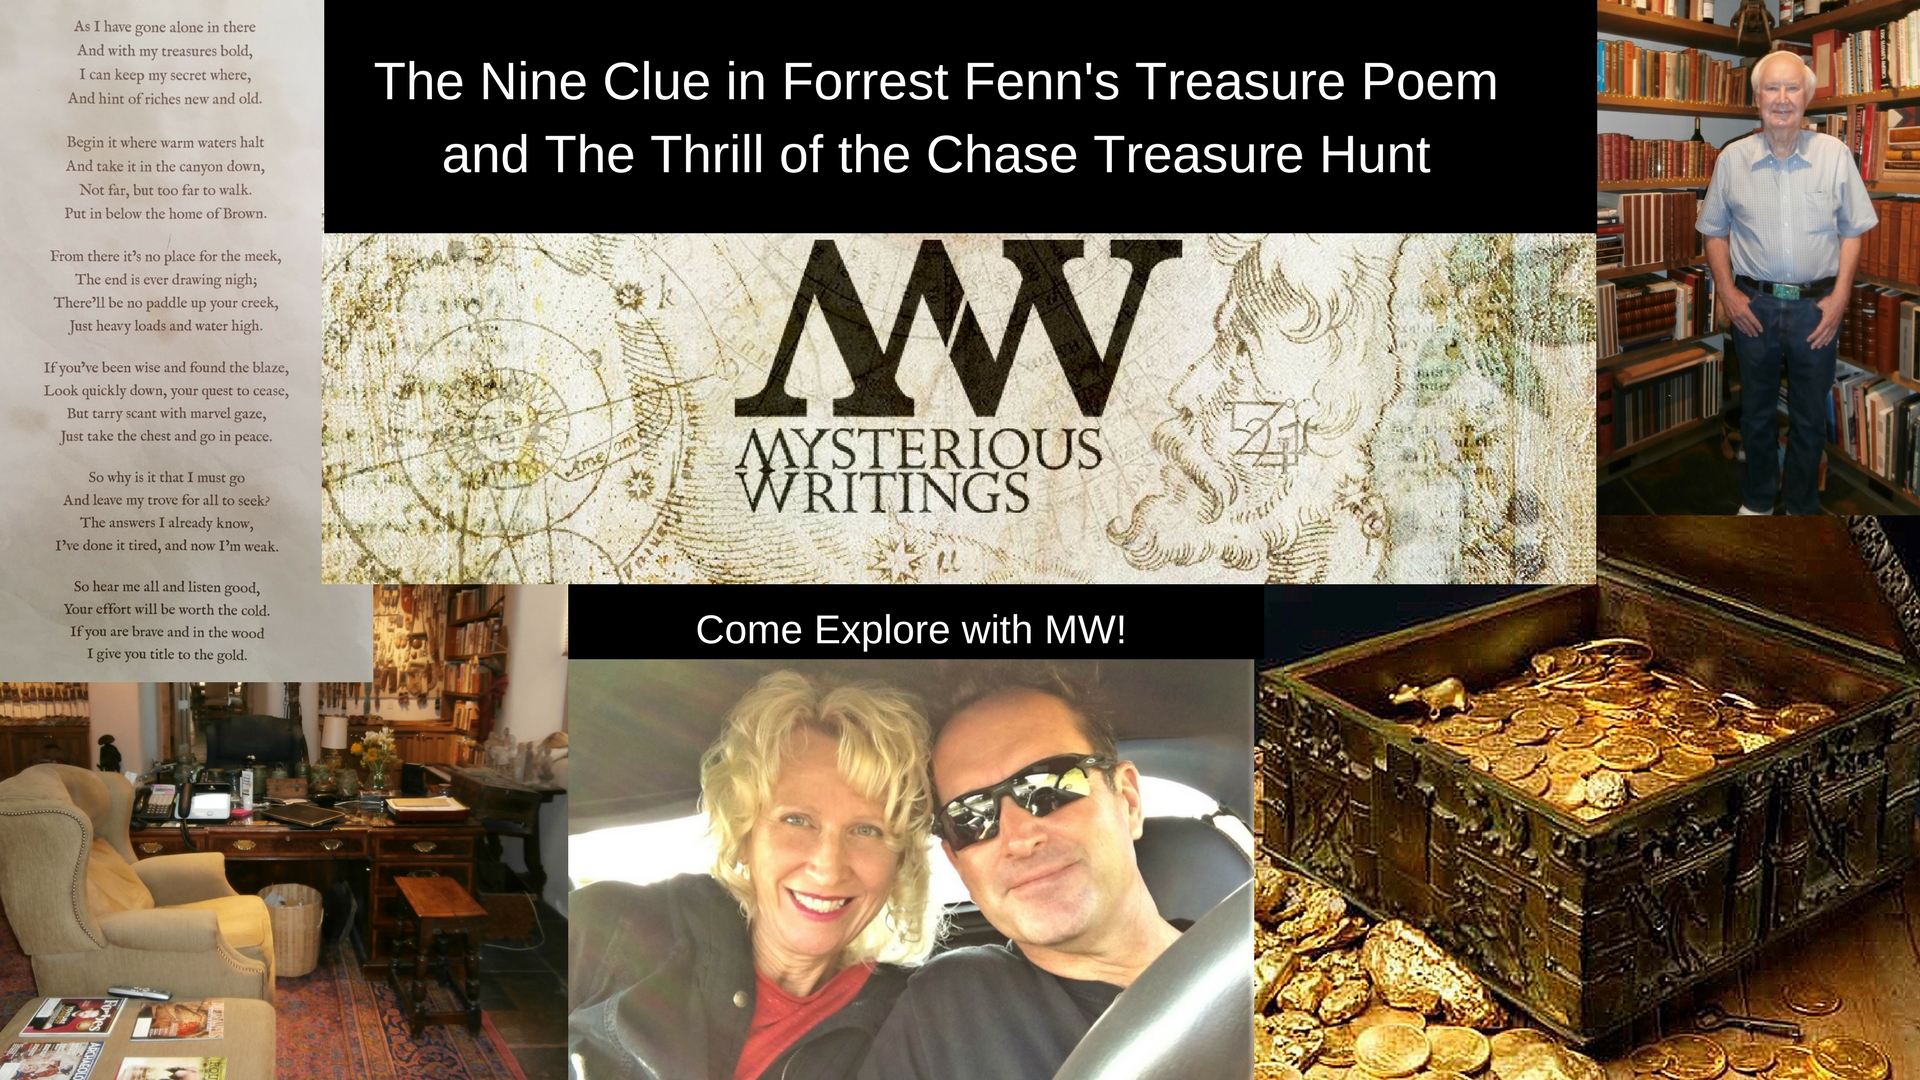 The Nine Clues in Forrest Fenn’s Treasure Poem and The Thrill of the Chase Treasure Hunt